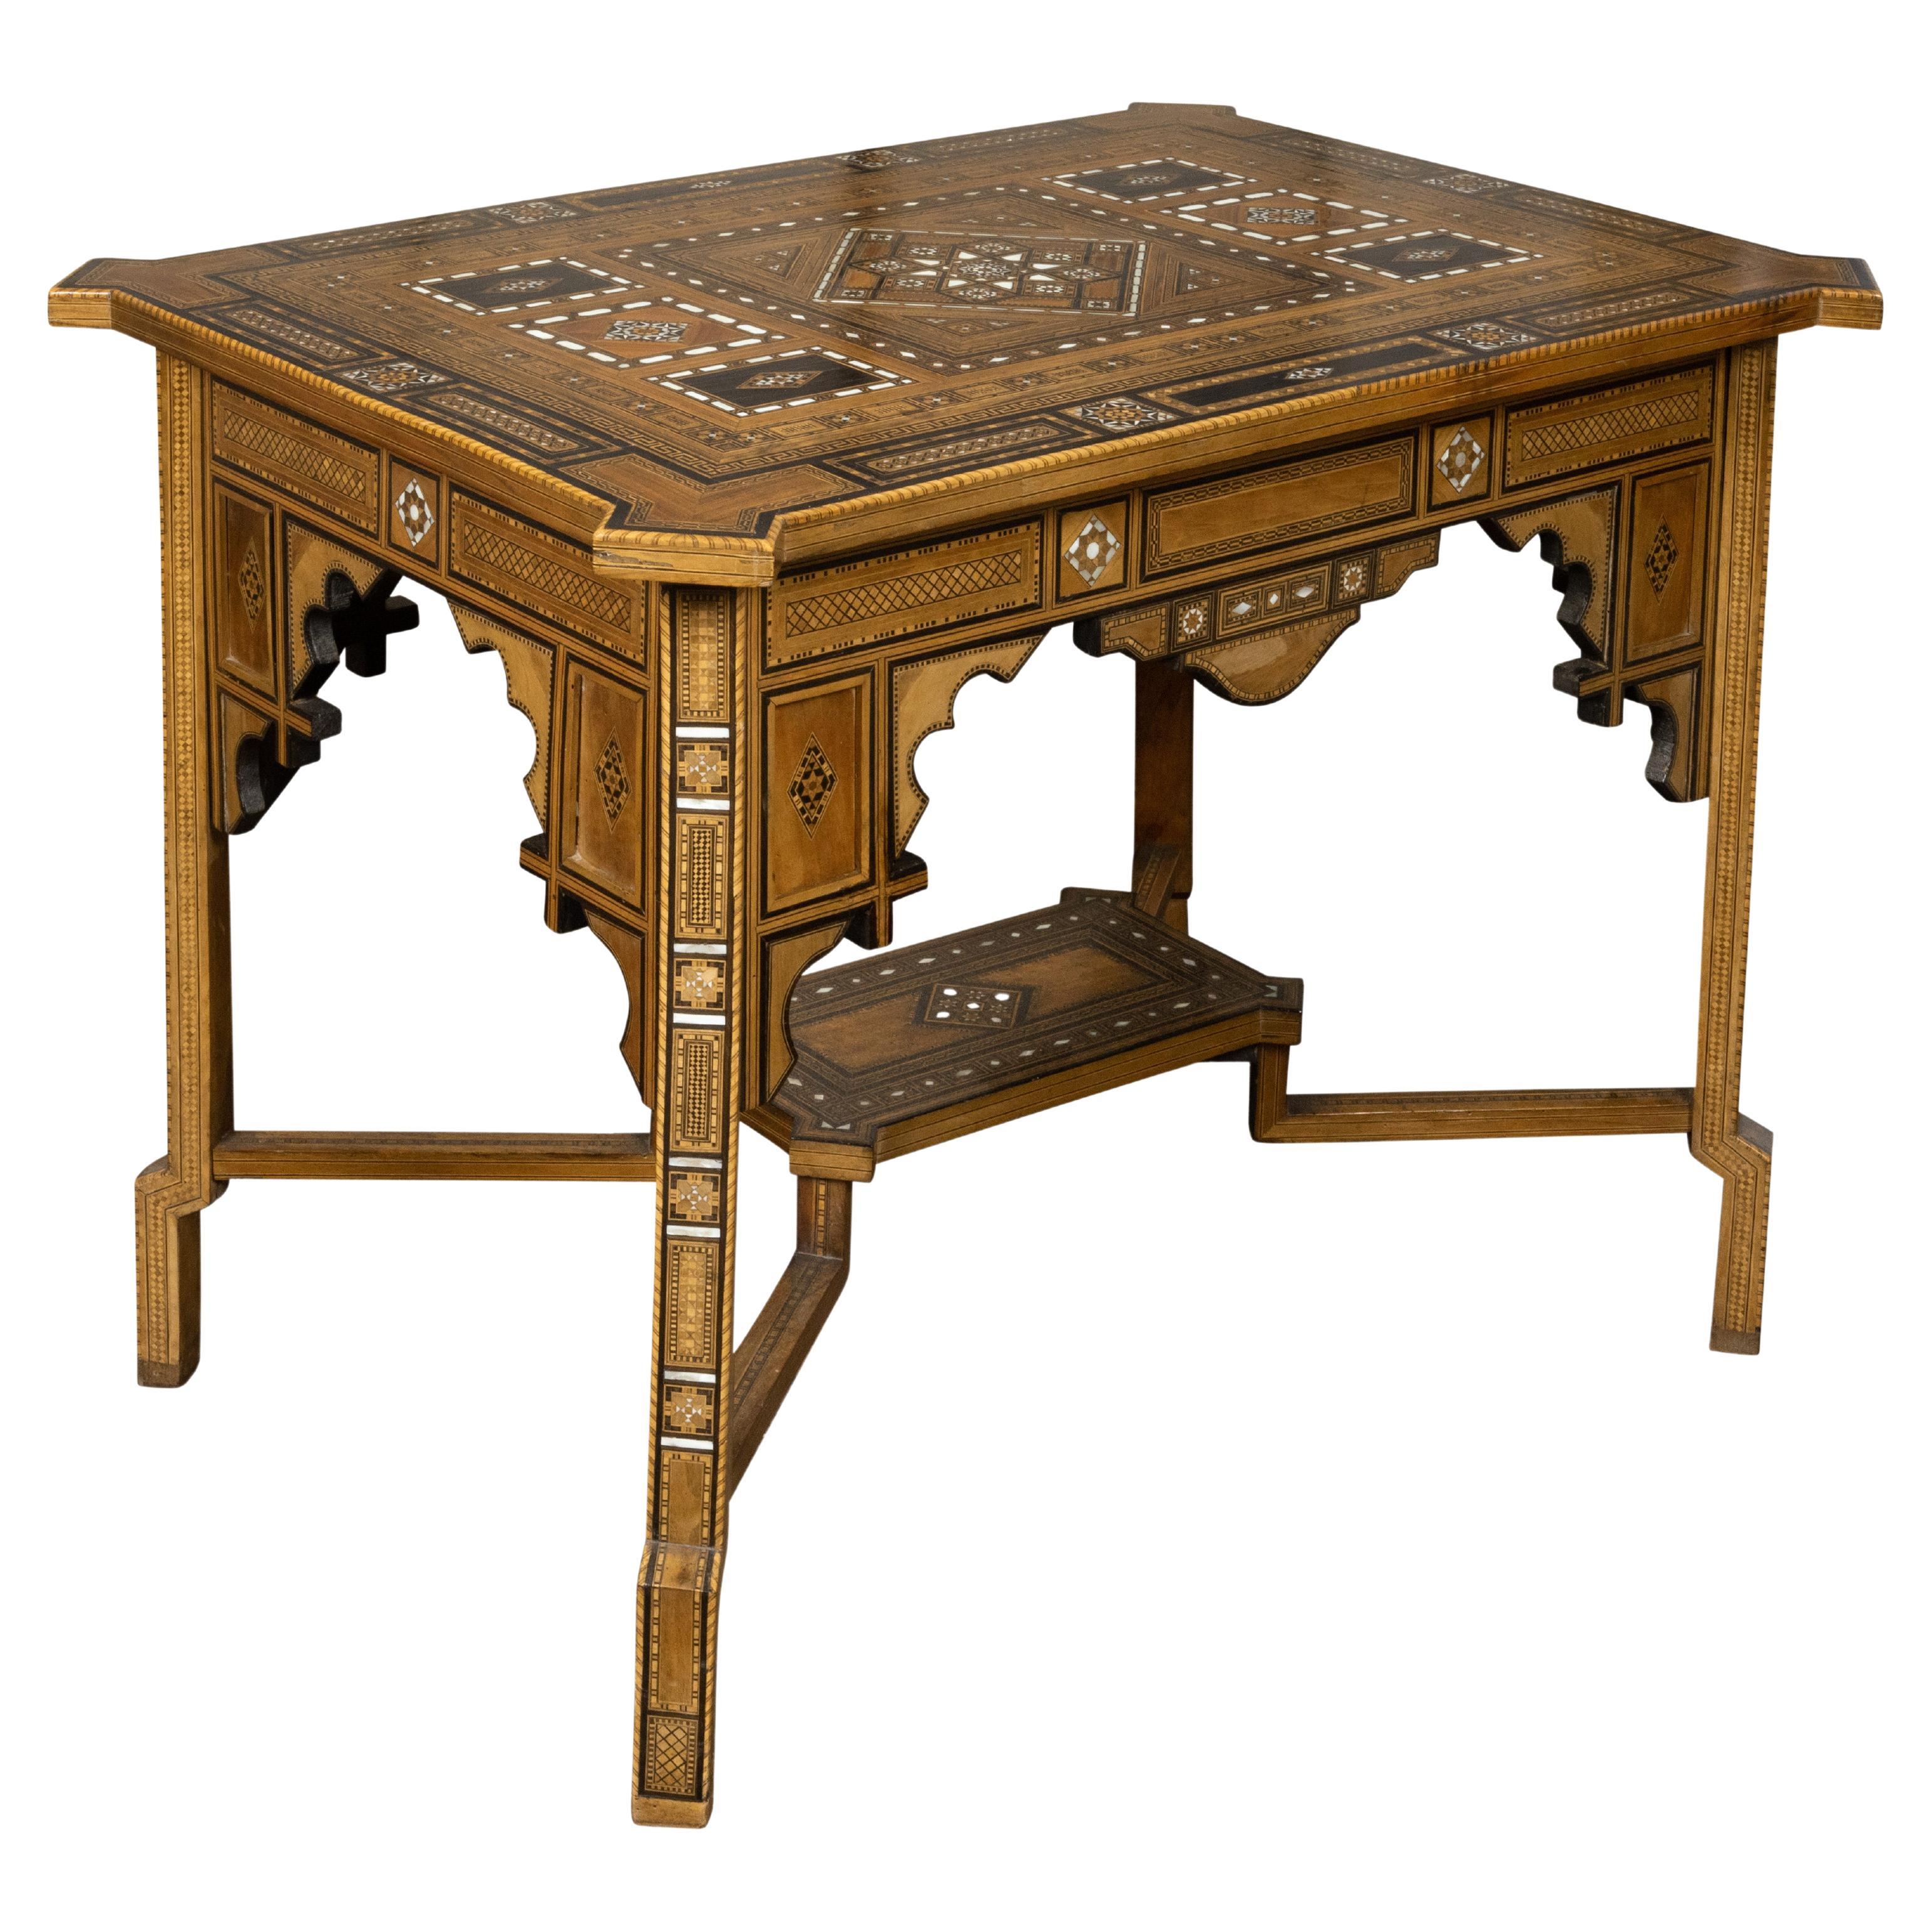 Moorish Style Moroccan Center Table with Inlaid Mother of Pearl Geometric Motifs